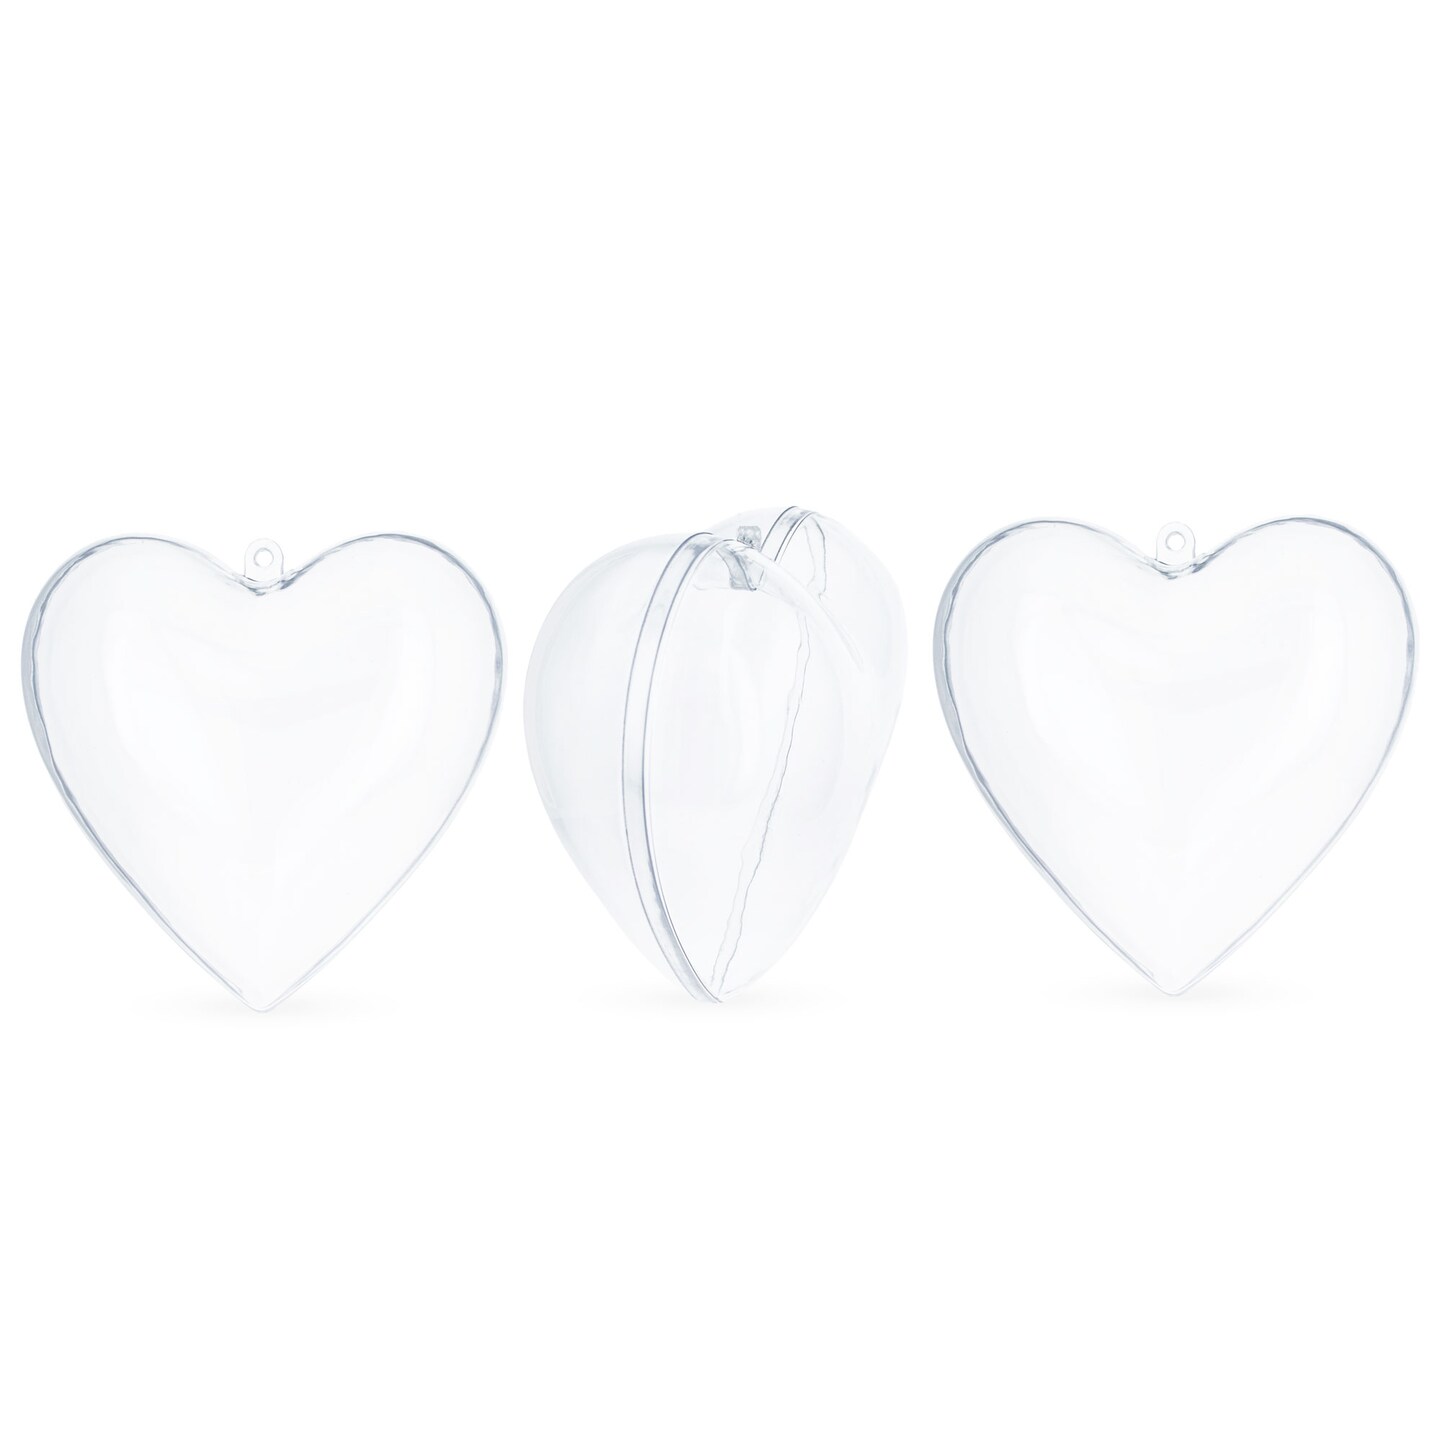 Set of 3 Clear Plastic Hearts Ornaments 2.45 Inches (62 mm)